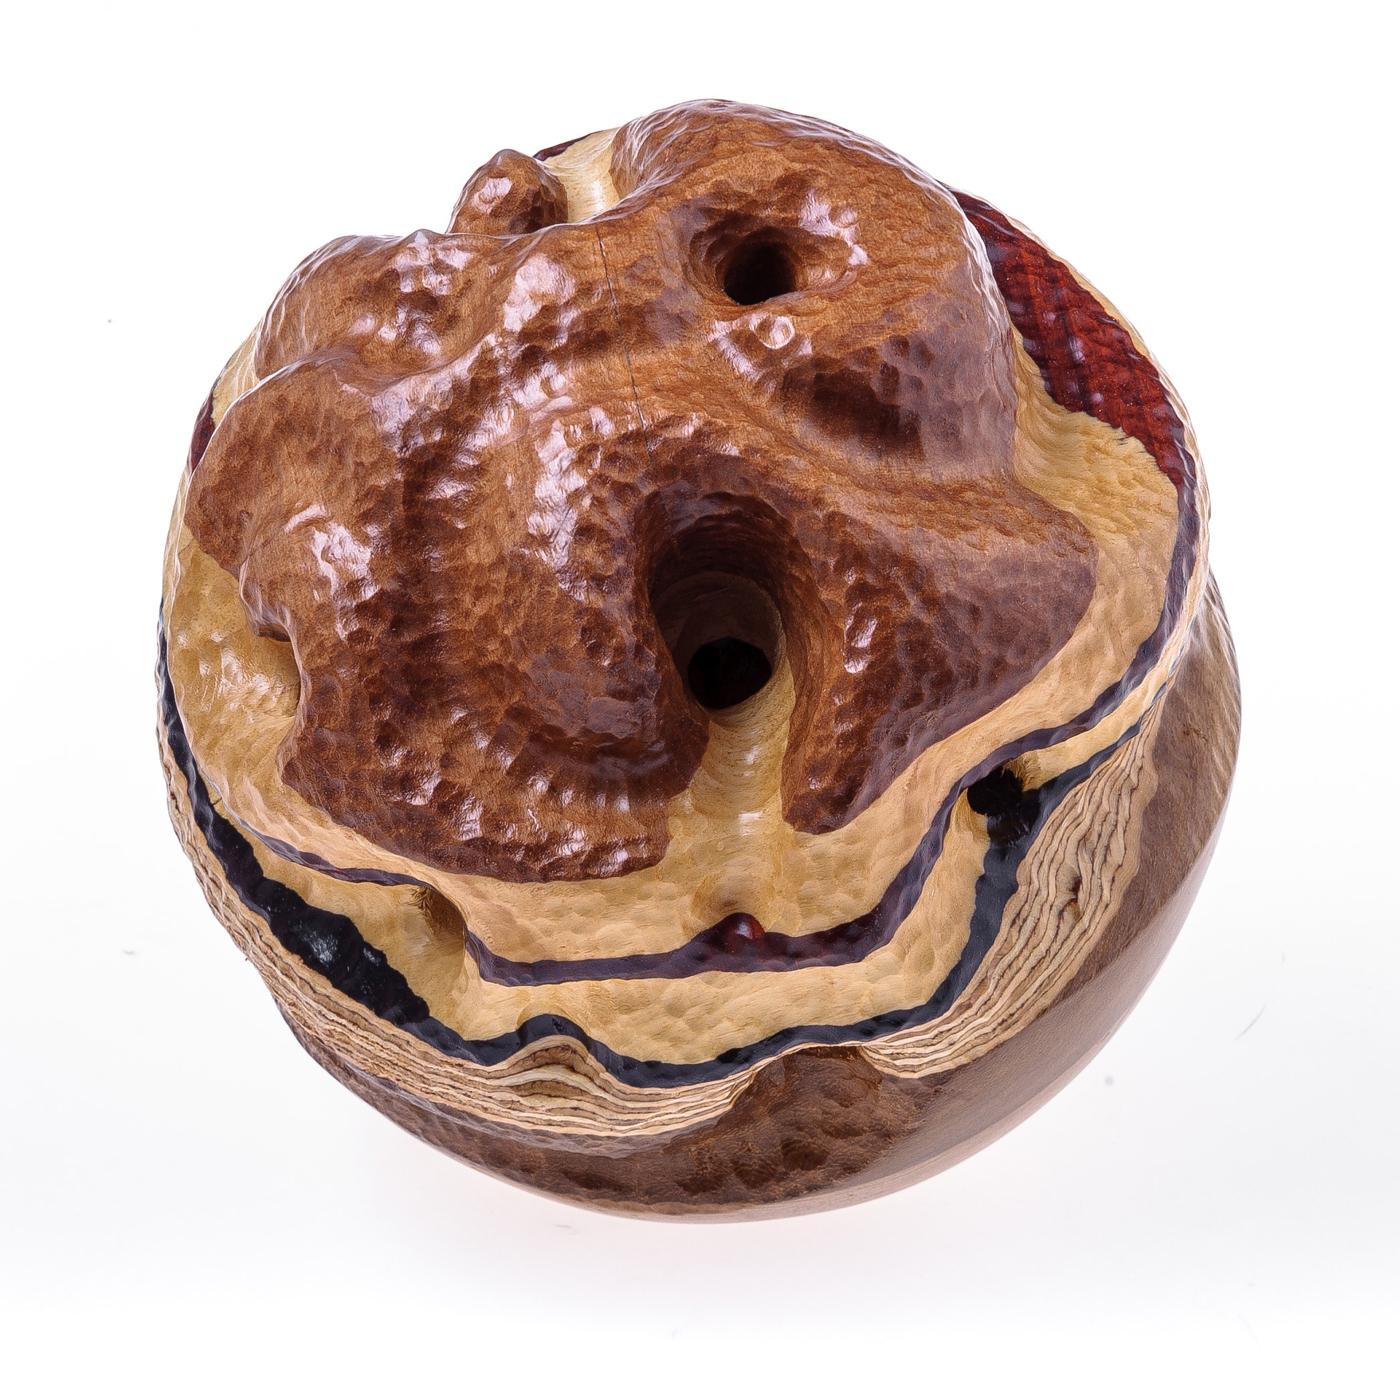 Craftsmanship takes center stage in this remarkable wooden sculpture inspired by the subtle elegance of trees and nature. The sculpture is fashioned of layers of light and dark wood, hand-assembled and carved to form a captivating sphere that boasts